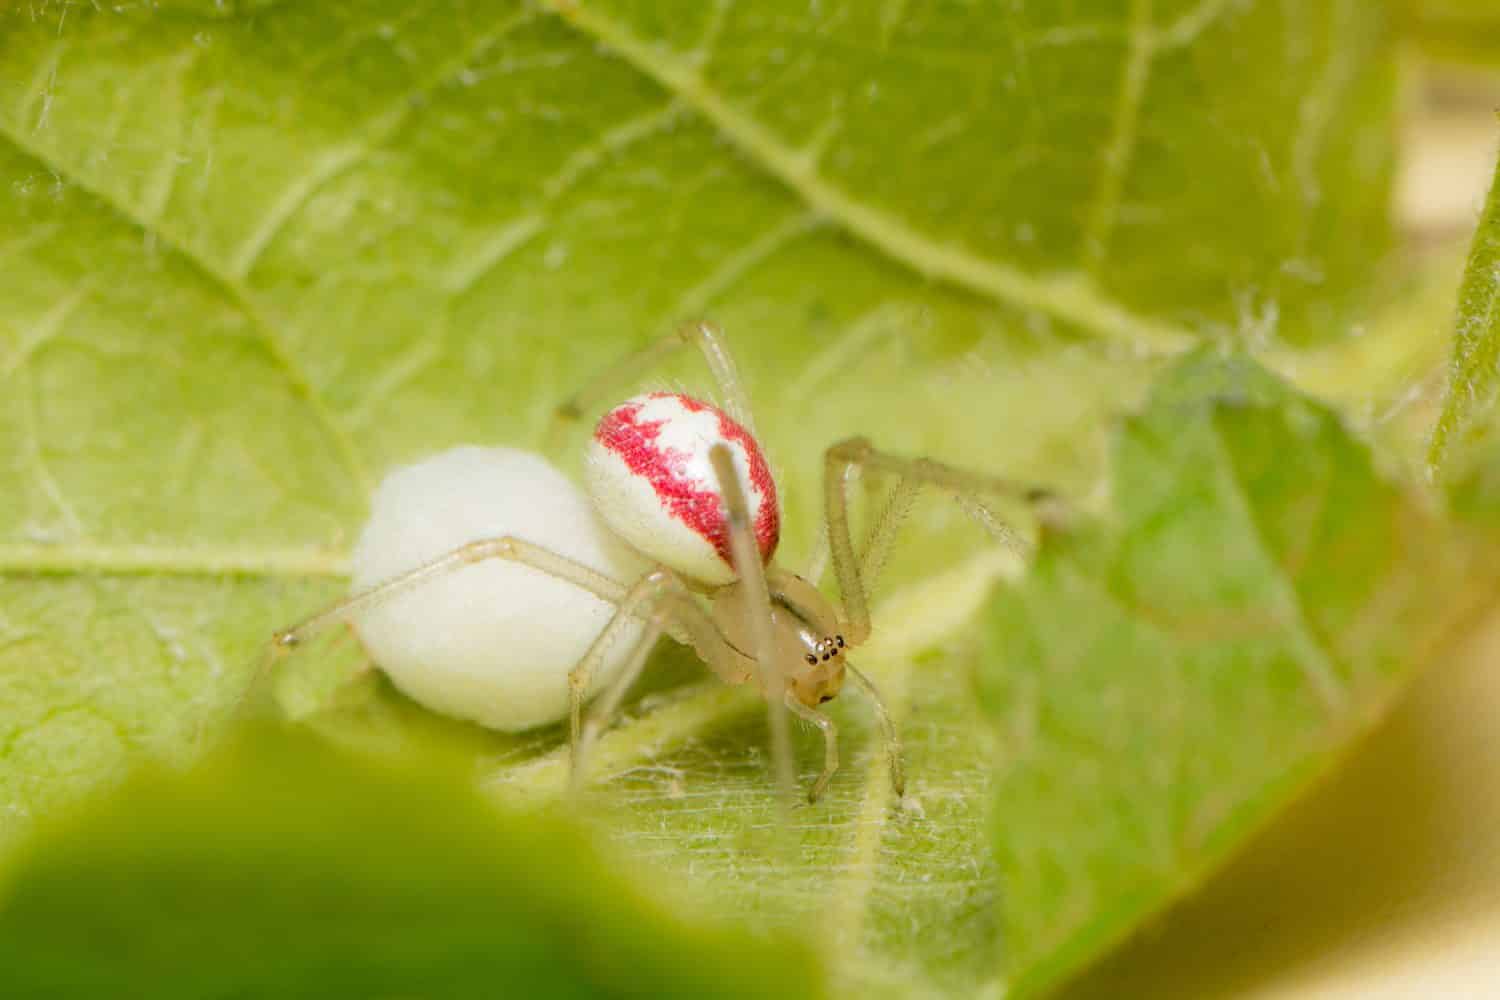 A macro image of a Common Candy-striped Spider - Enoplognatha ovata (redimita form). This female is hiding within a leaf while guarding her egg sac. The color of these is variable.